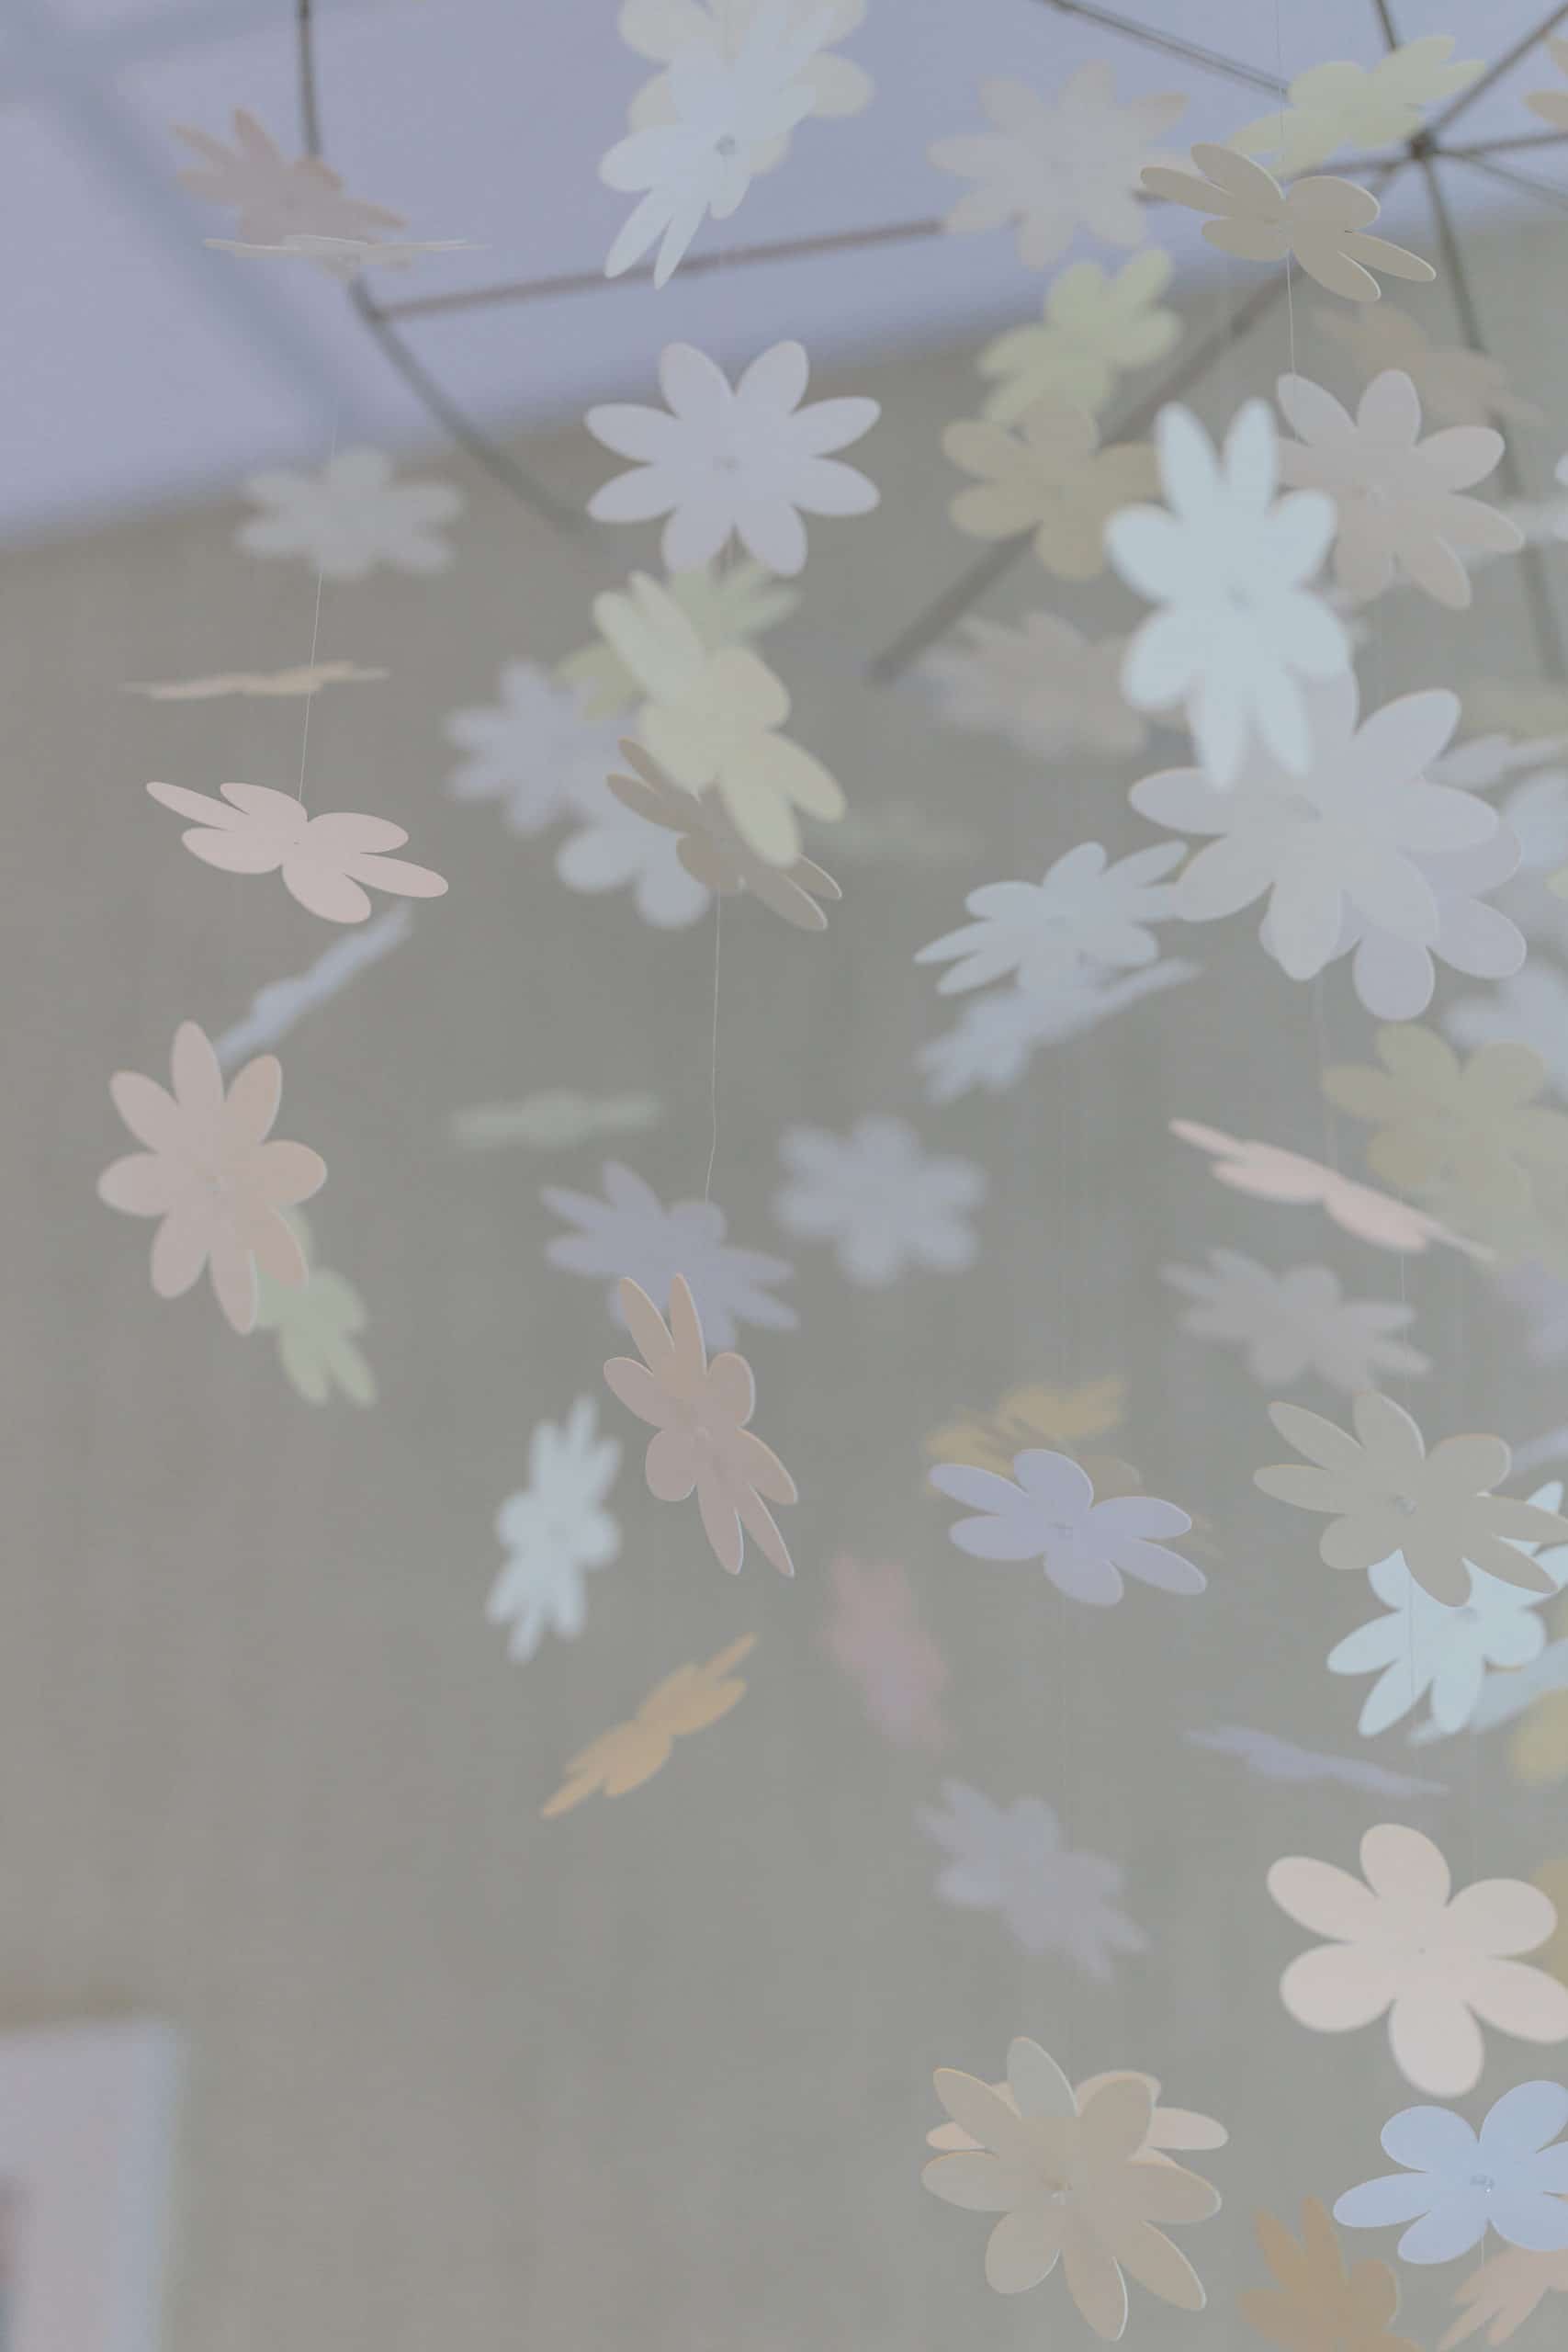 A faded photo of a mobile with paper flower cutouts.